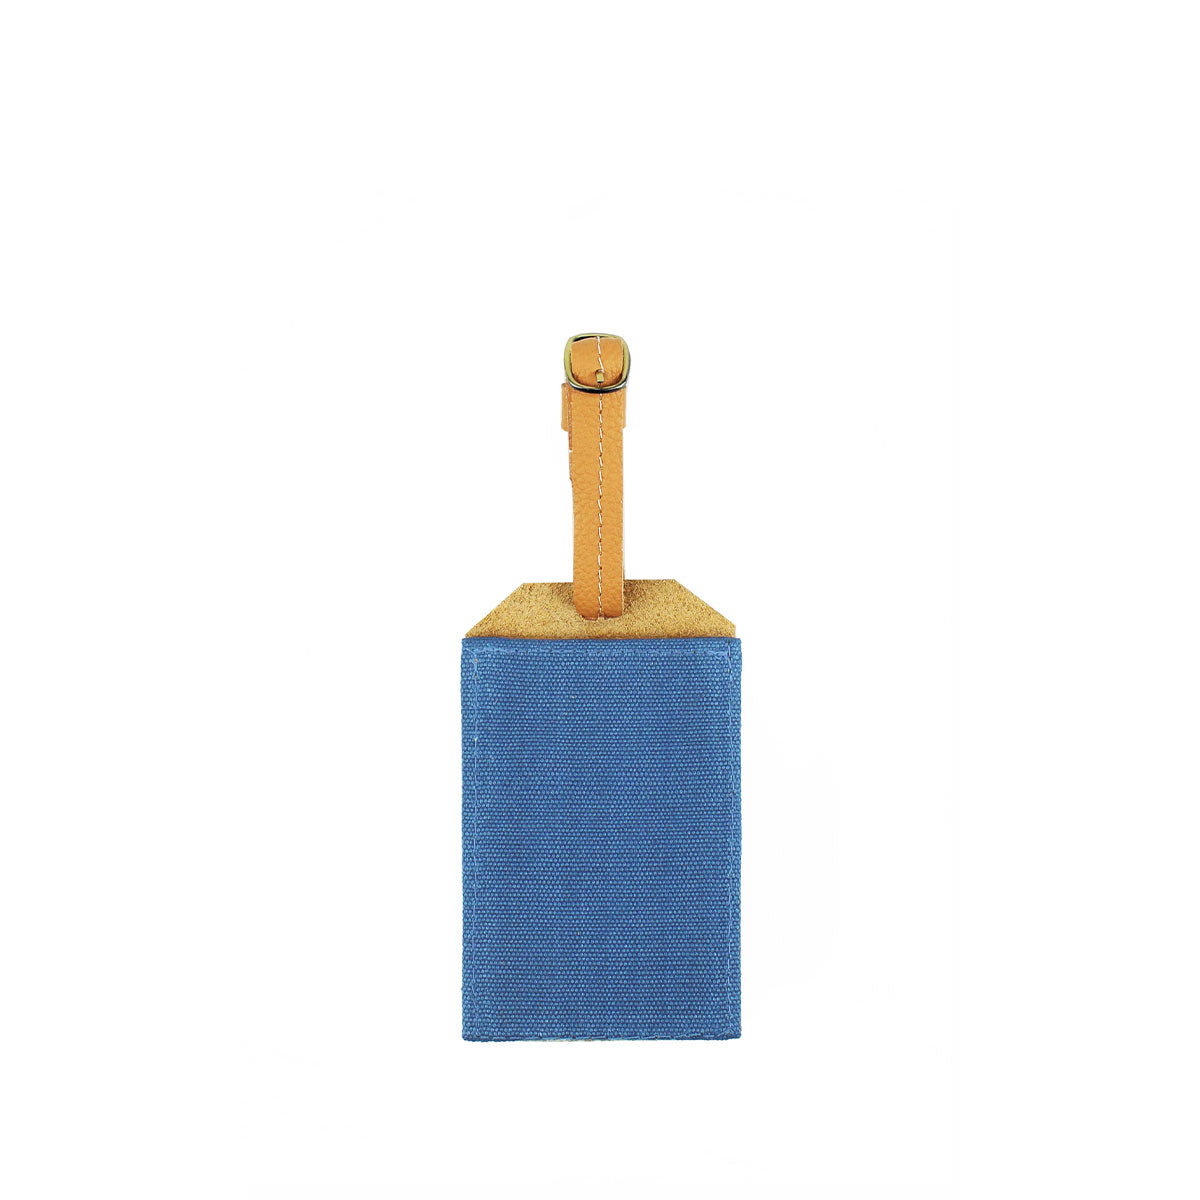 Ines Handwoven Ocen Blue Luggage Tag